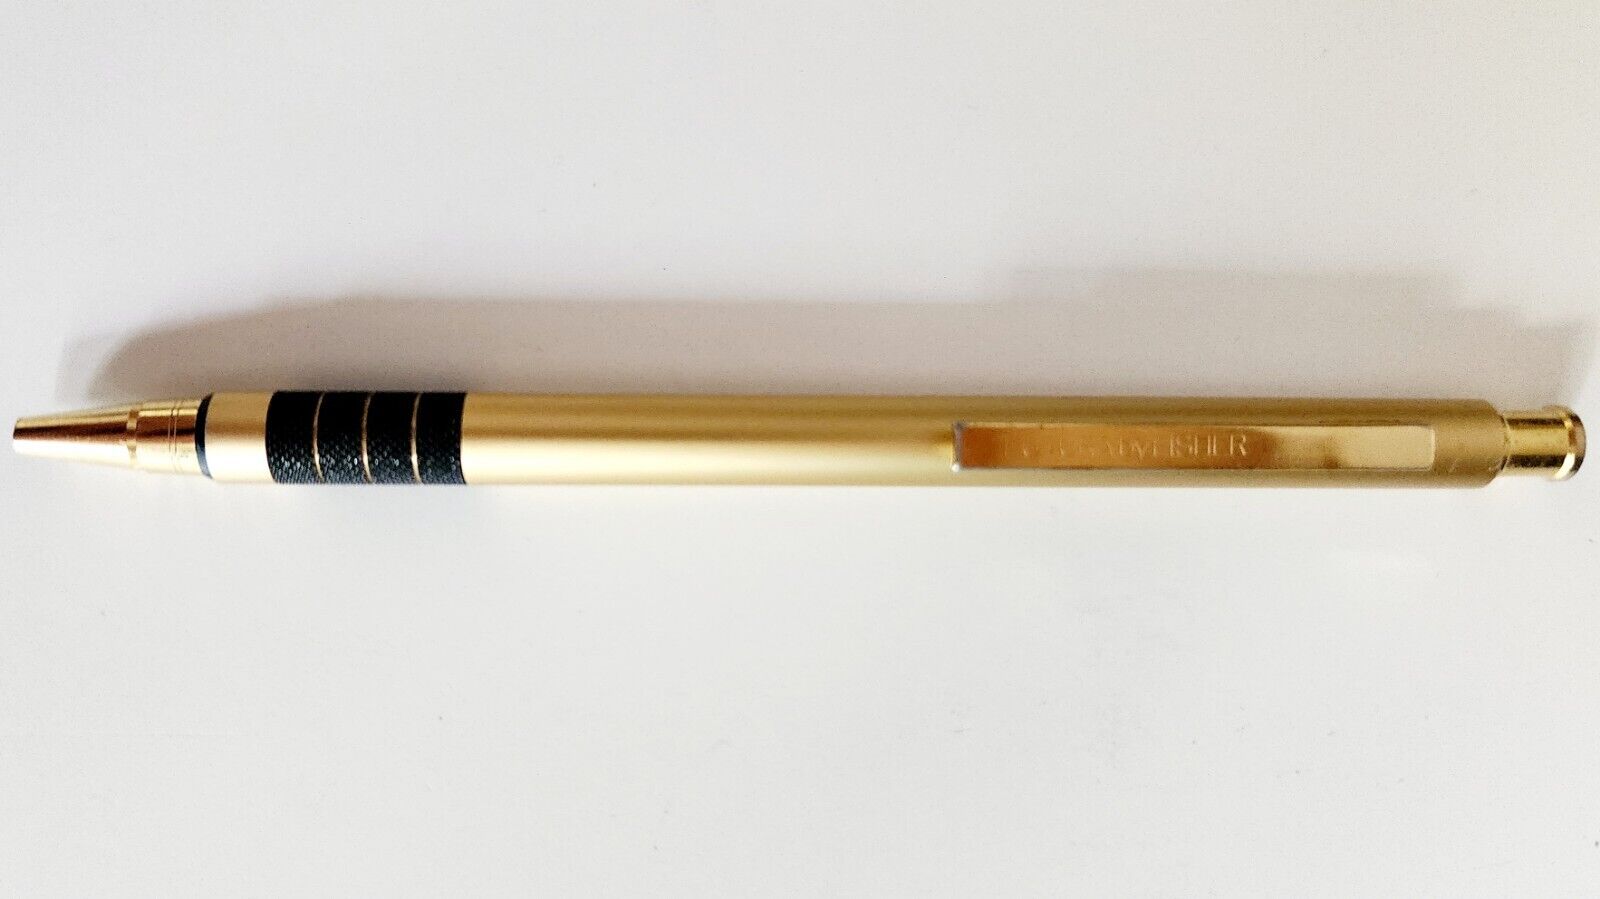 Fisher Vintage Space Pen Gold in Great Working Condition Ships w/ Care